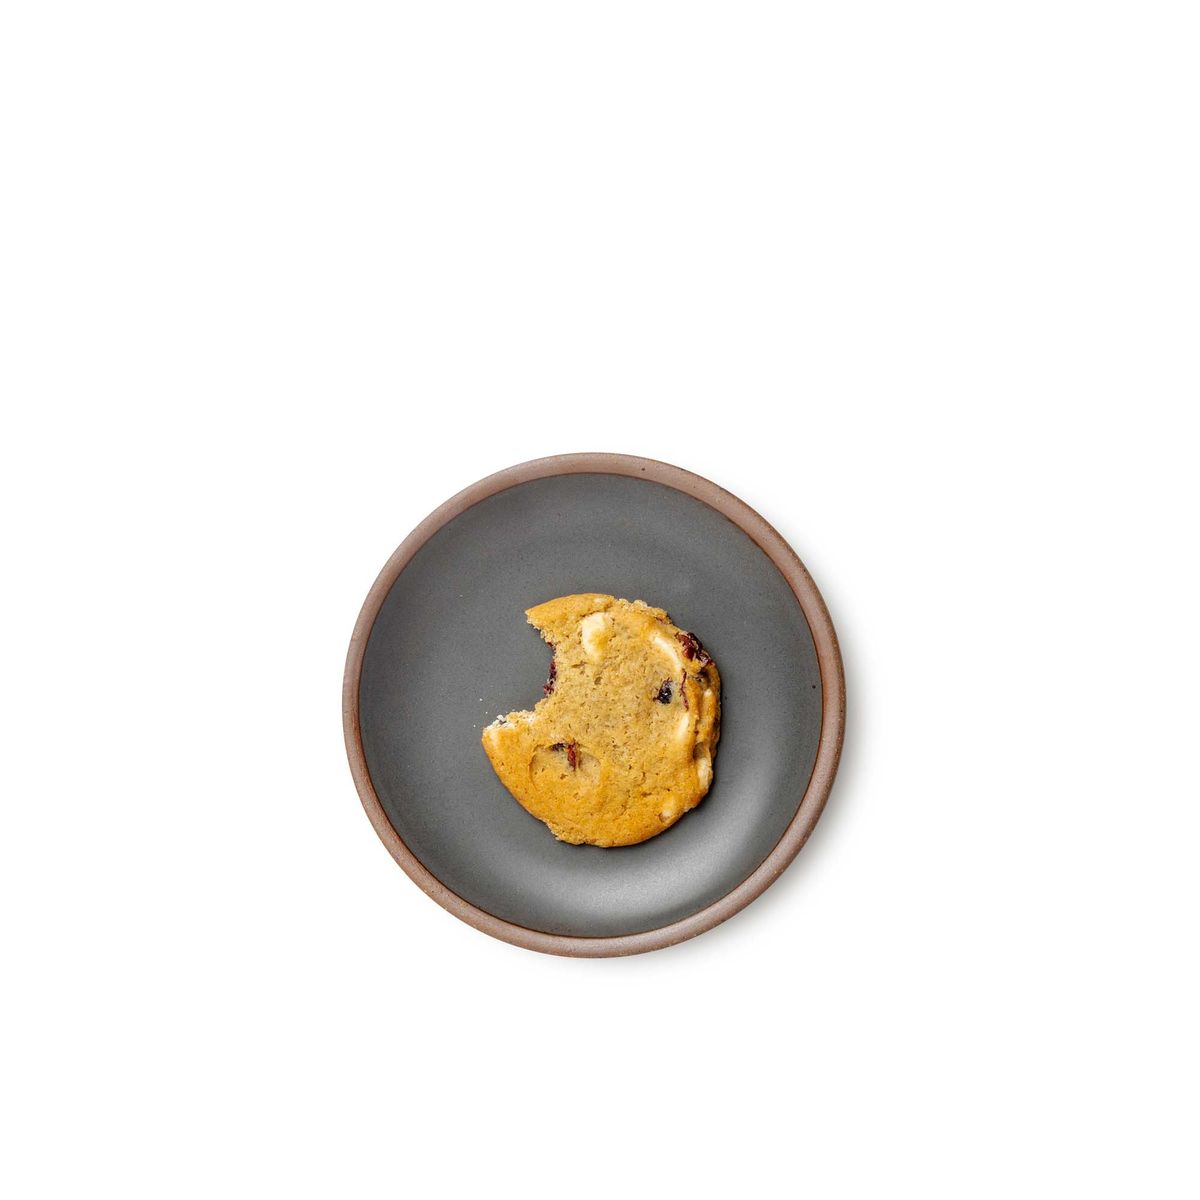 A half-eaten cookie on a dessert sized ceramic plate in a cool, medium grey color featuring iron speckles and an unglazed rim